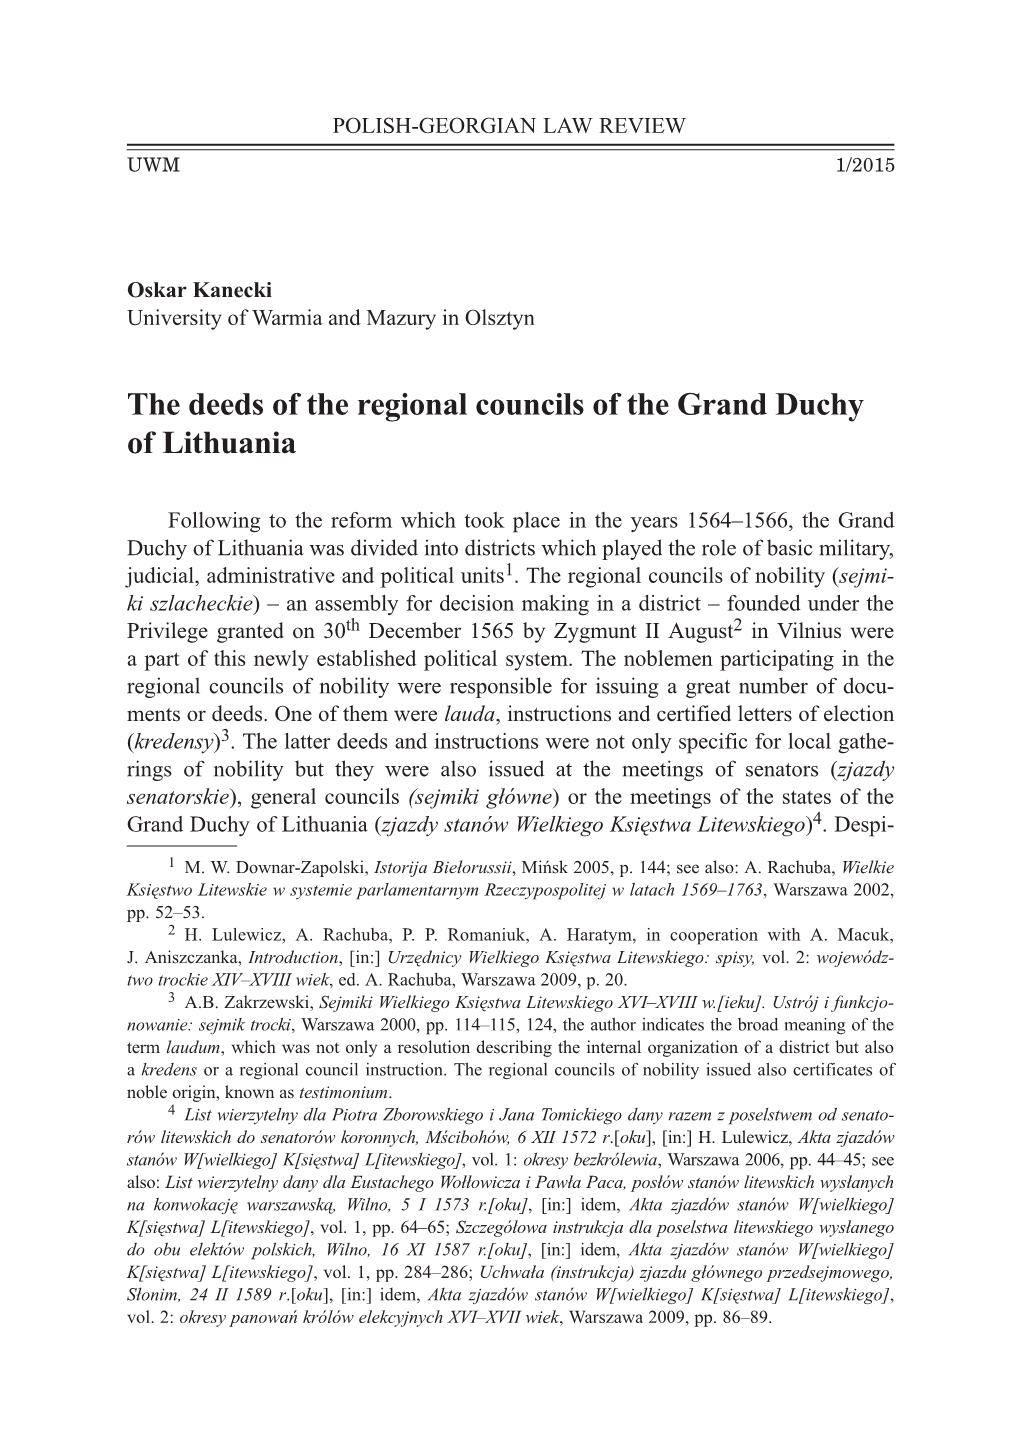 The Deeds of the Regional Councils of the Grand Duchy of Lithuania